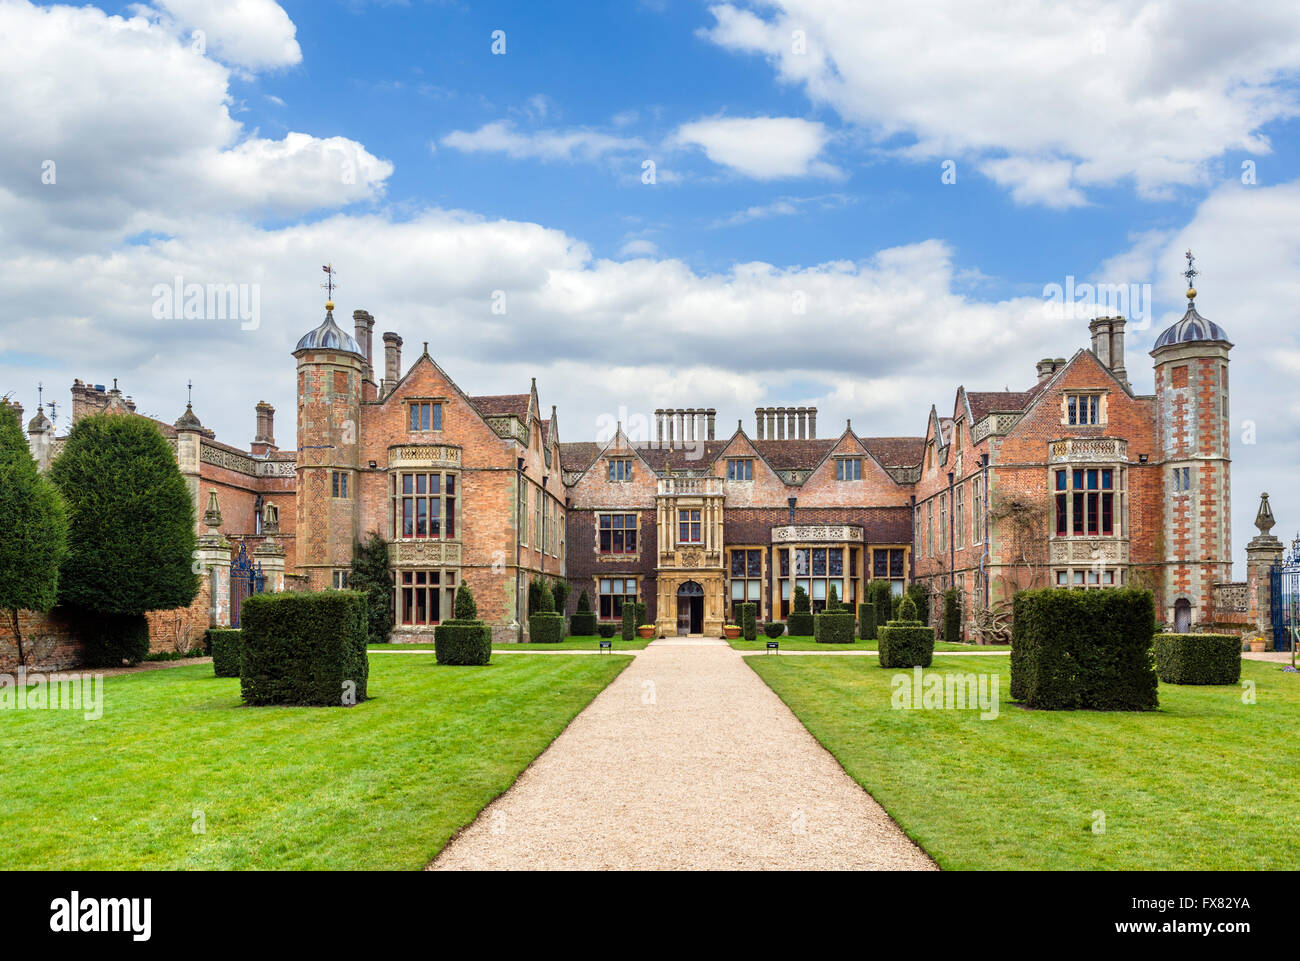 Charlecote Park, a manor house near Stratford-upon-Avon dating from the 16thC, Warwickshire, England, UK Stock Photo